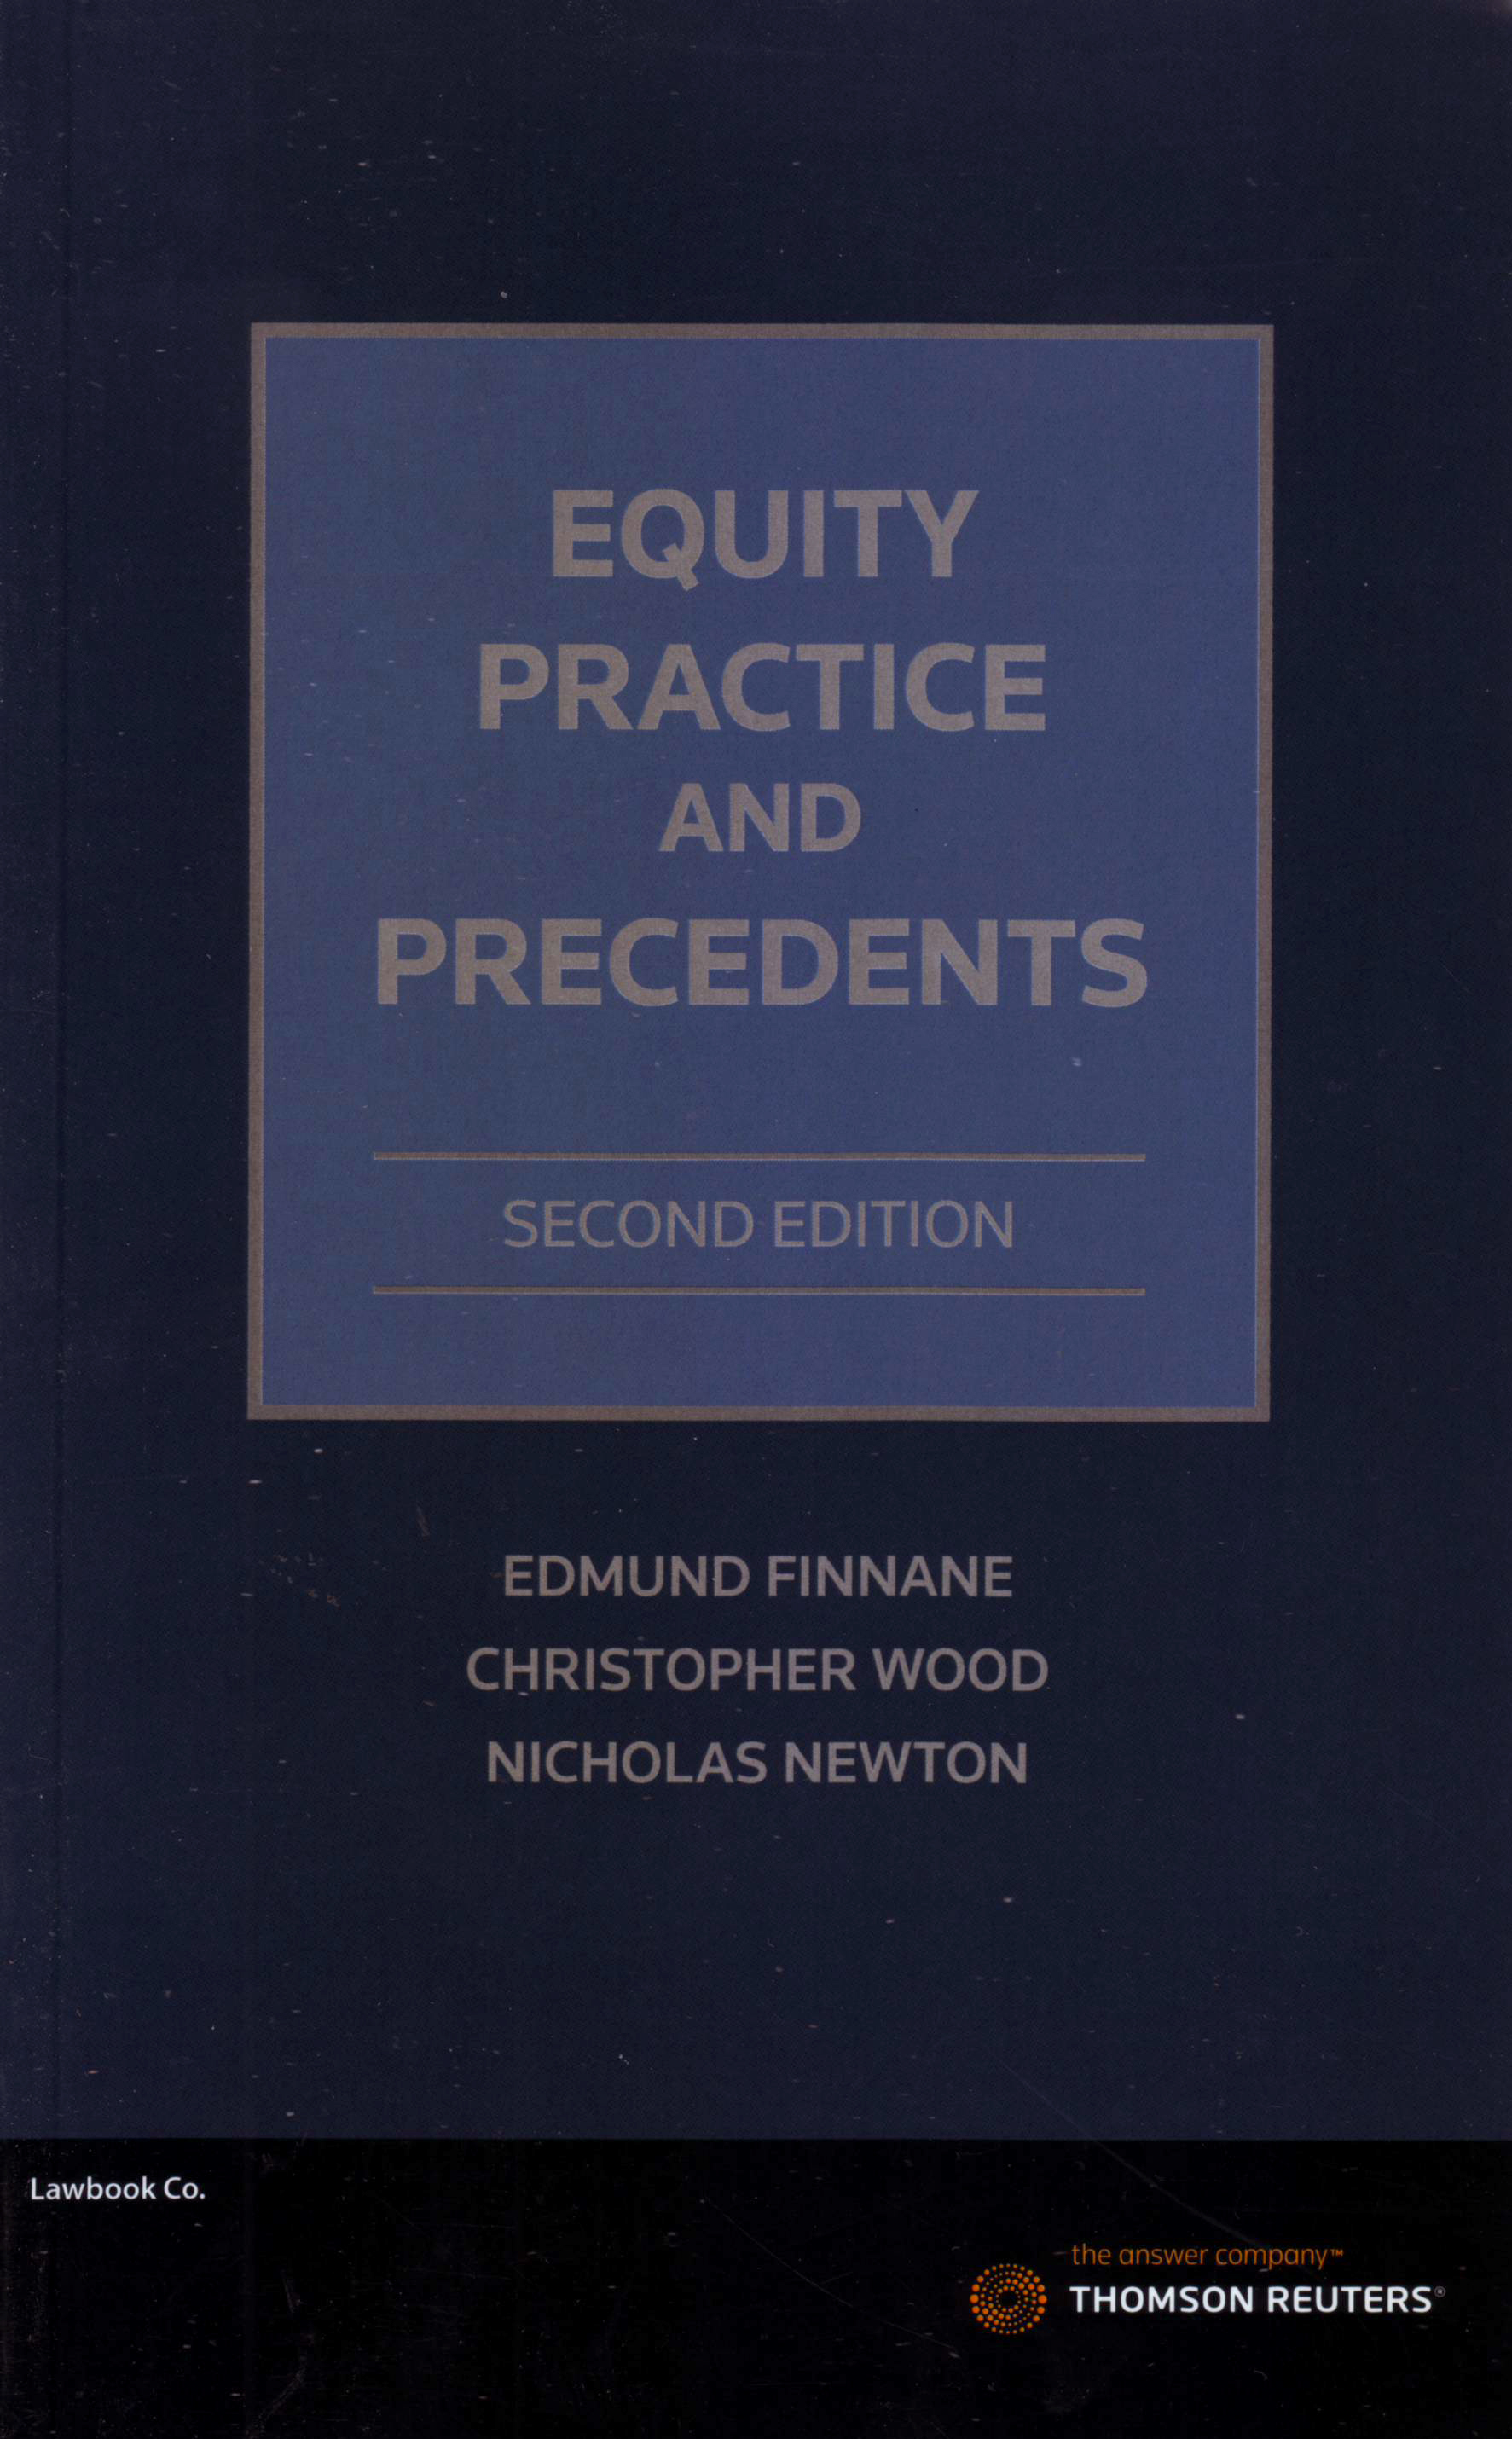 Equity Practice and Precedents e2